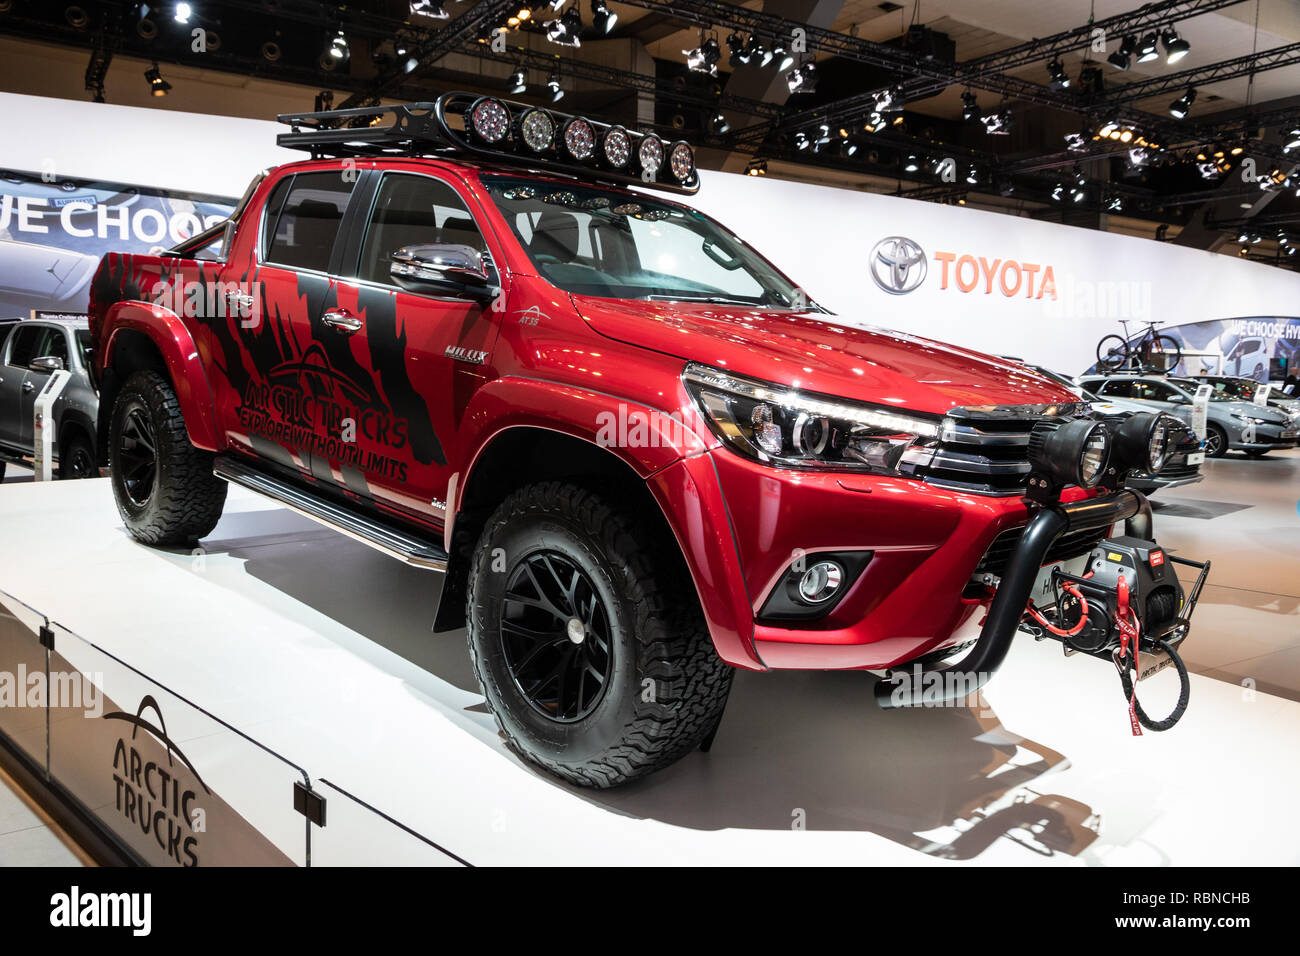 BRUSSELS - JAN 10, 2018: Toyota Hilux pick-up truck showcased at the Brussels Expo Autosalon motor show. Stock Photo